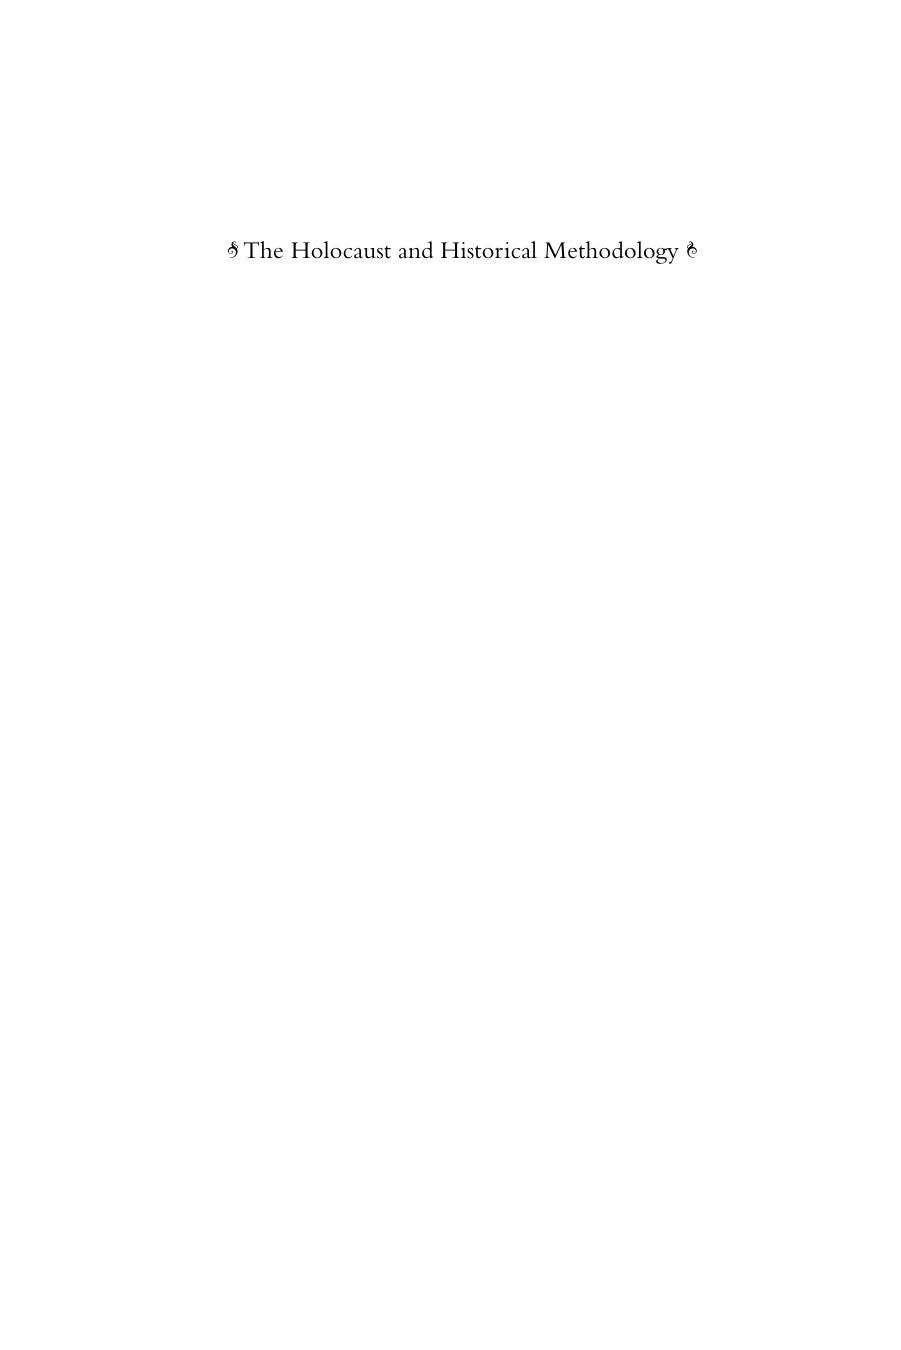 The Holocaust and Historical Methodology by Dan Stone (editor)